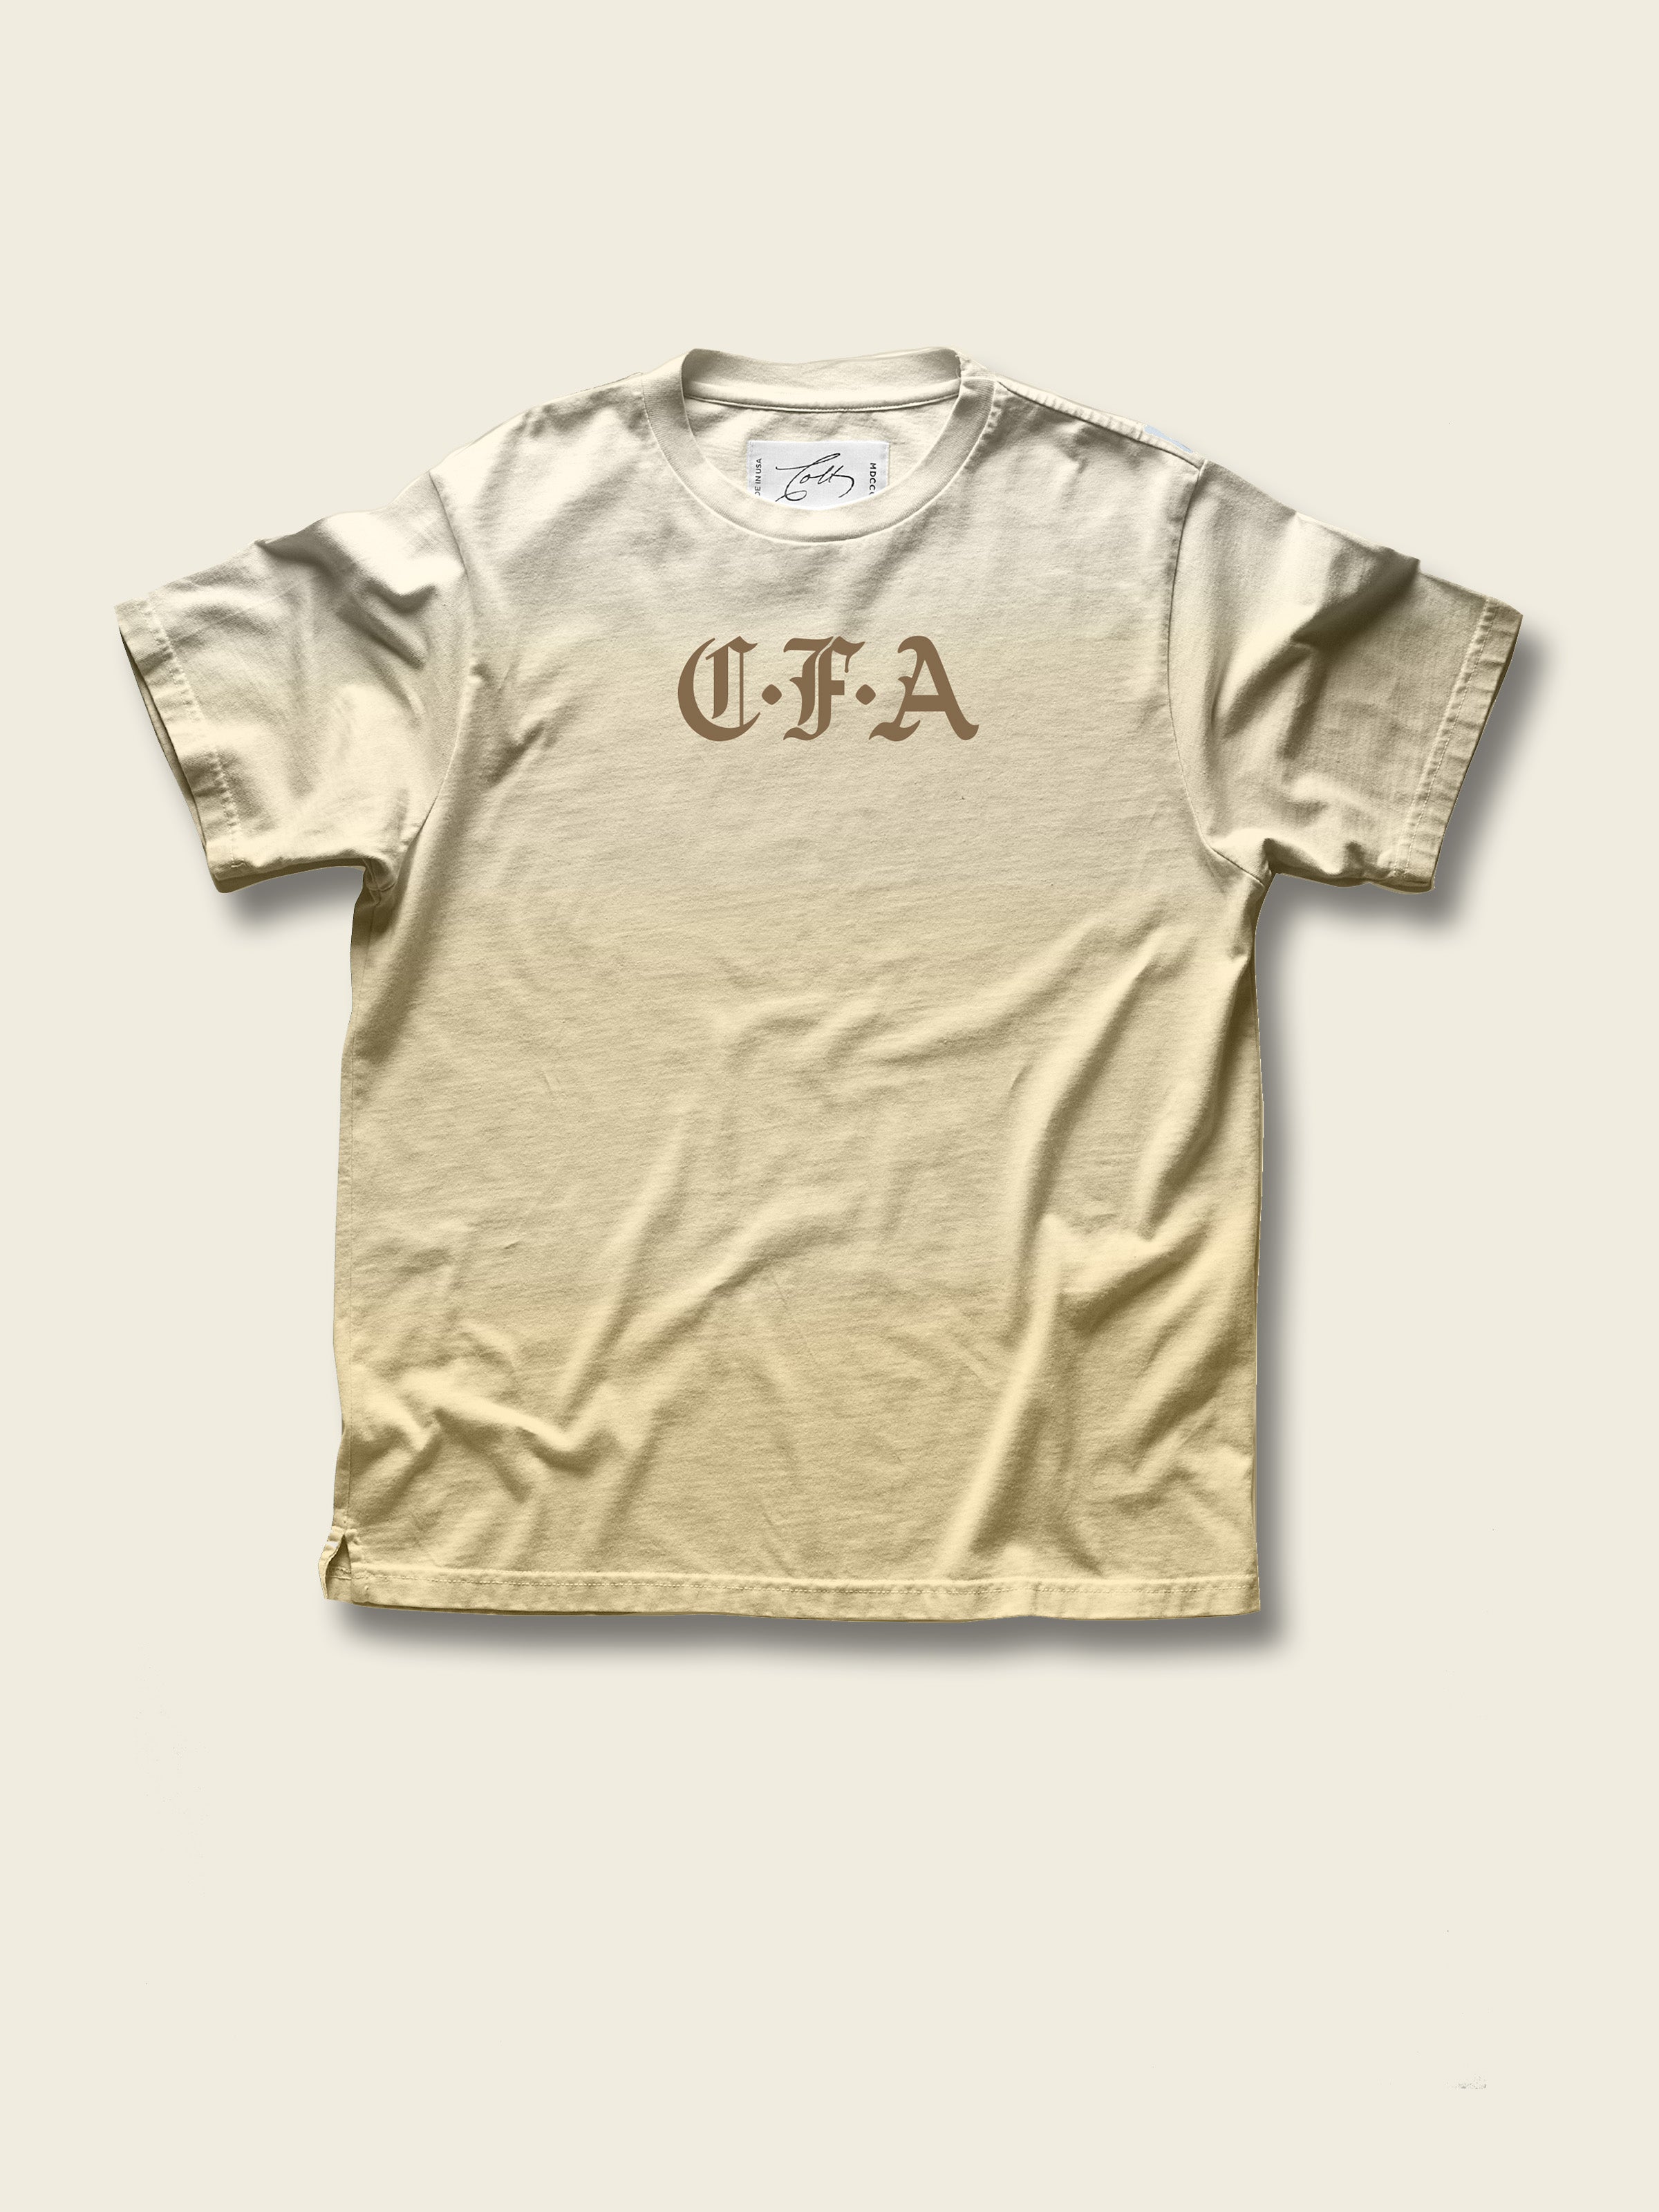 CFA & Seal Short Sleeve T-Shirt in Parchment